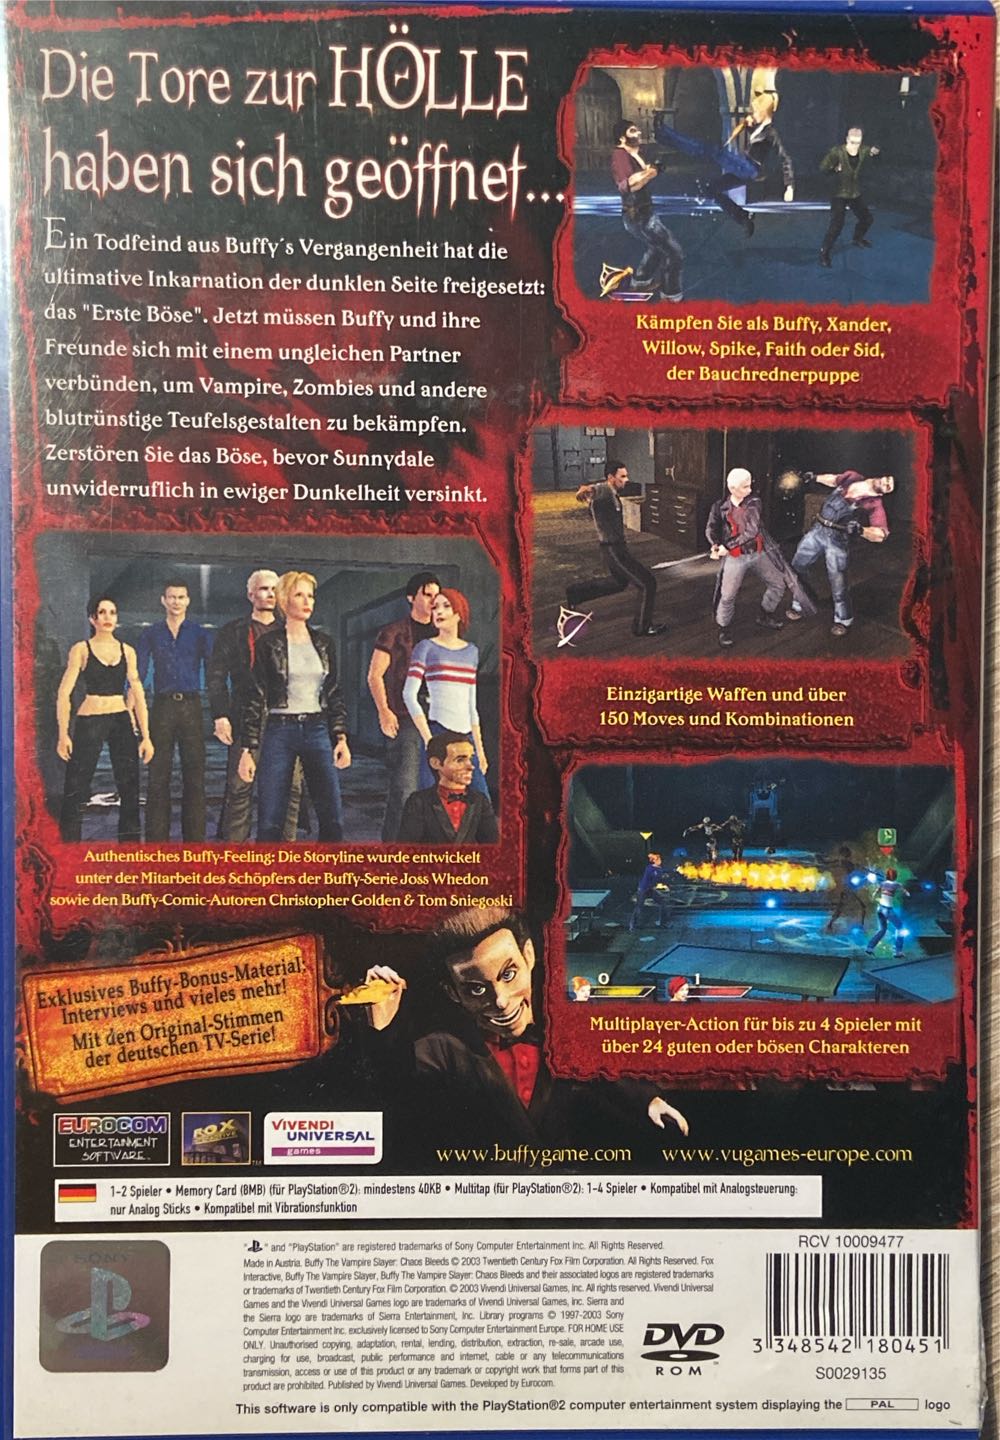 Buffy The Vampire Slayer: Chaos Bleeds - Sony PlayStation 2 (PS2) (Sierra - 4) video game collectible [Barcode 3348542180451] - Main Image 3